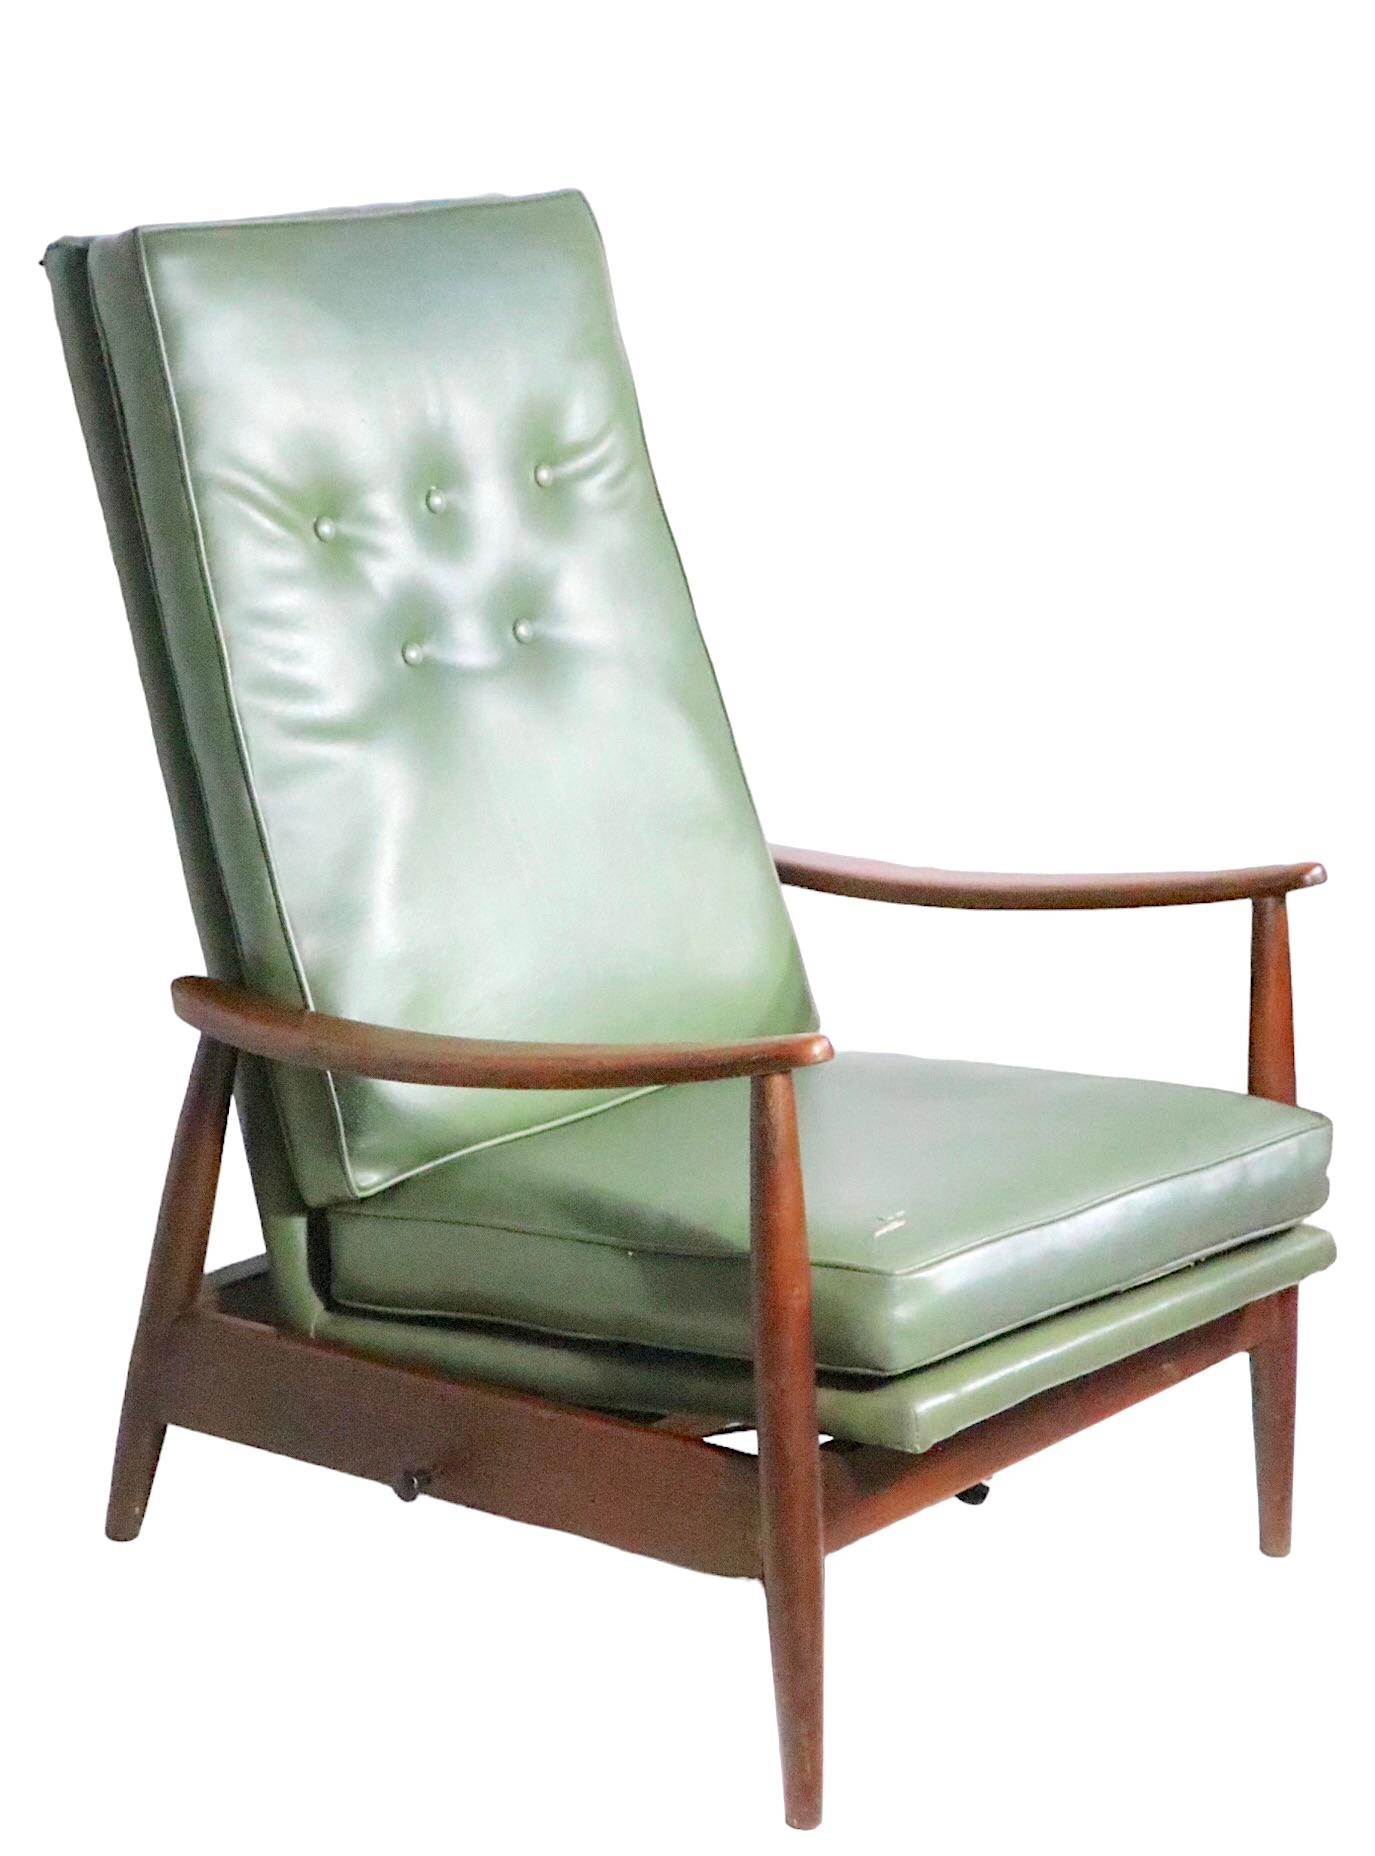  Milo Baughman for James Inc. recliner,  platform rocker, circa 1950's. This chair features a vinyl upholstered high back, and seat, an  exposed architectural wood frame. The chair is in overall good condition, fully functional and usable as is, the